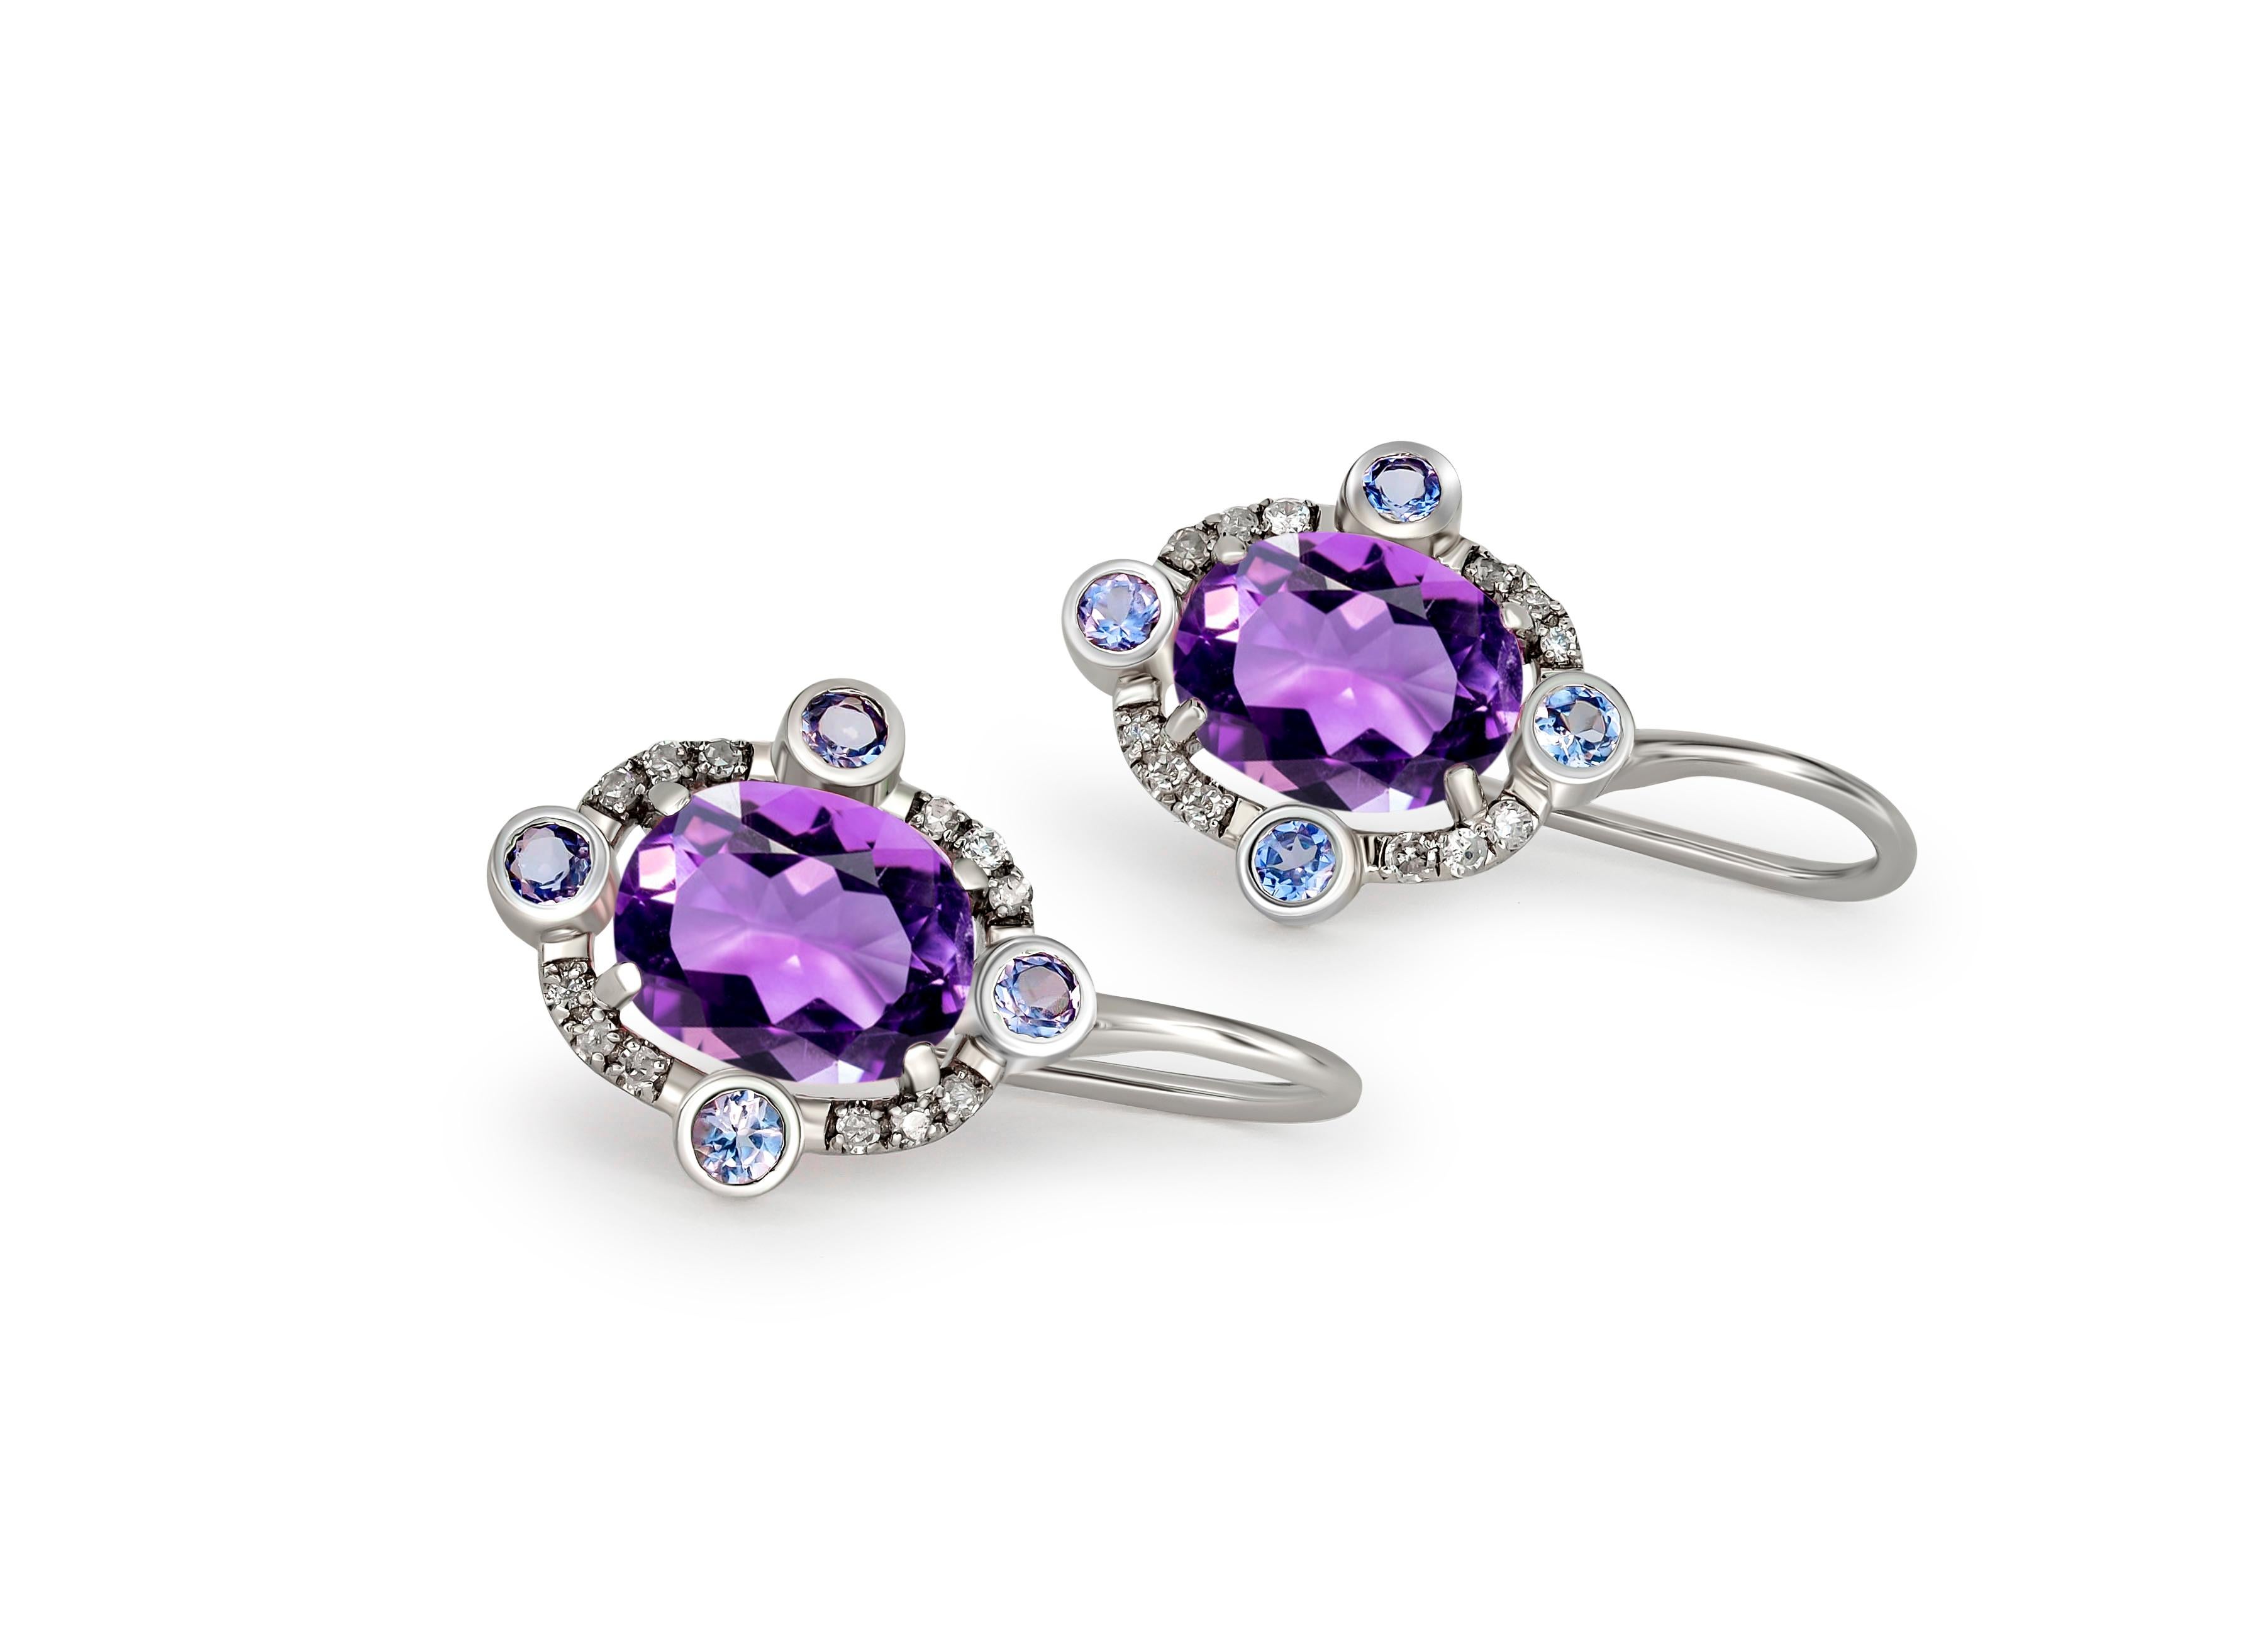 Amethysts 14k gold drop earrings.
Oval amethyst 14k gold earrings. 14 kt gold earrings with amethysts, sapphires and diamonds. February birthstone earrings. 

Gold - 14 kt gold 
Size: 20x12 mm 
Weight: 2.50

Central stones: 
Amethysts, 2 pieces,